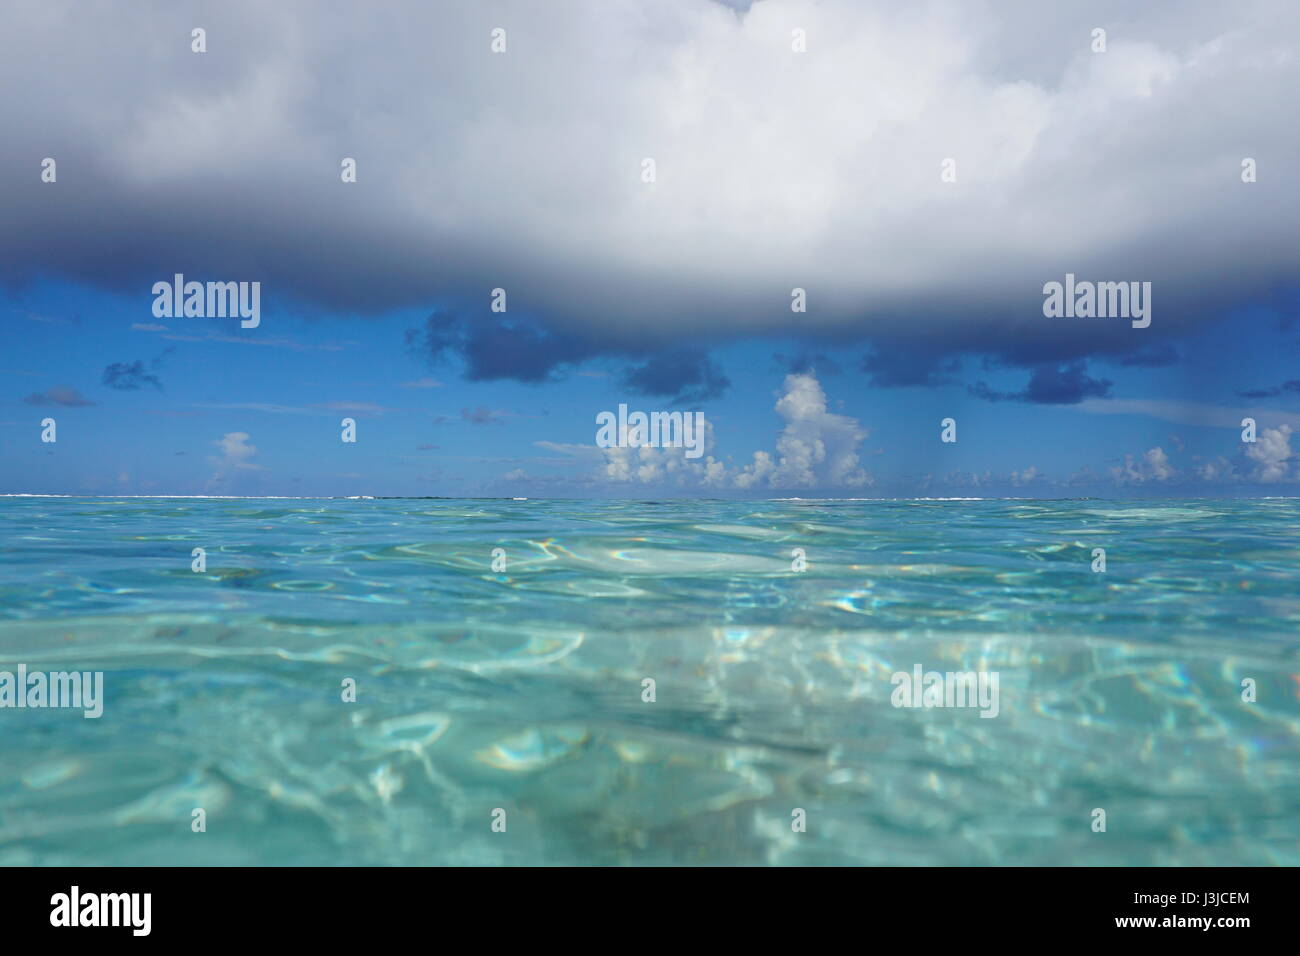 Seascape cloudy blue sky with turquoise water of the lagoon of Bora Bora, seen from sea surface, French Polynesia, south Pacific ocean Stock Photo